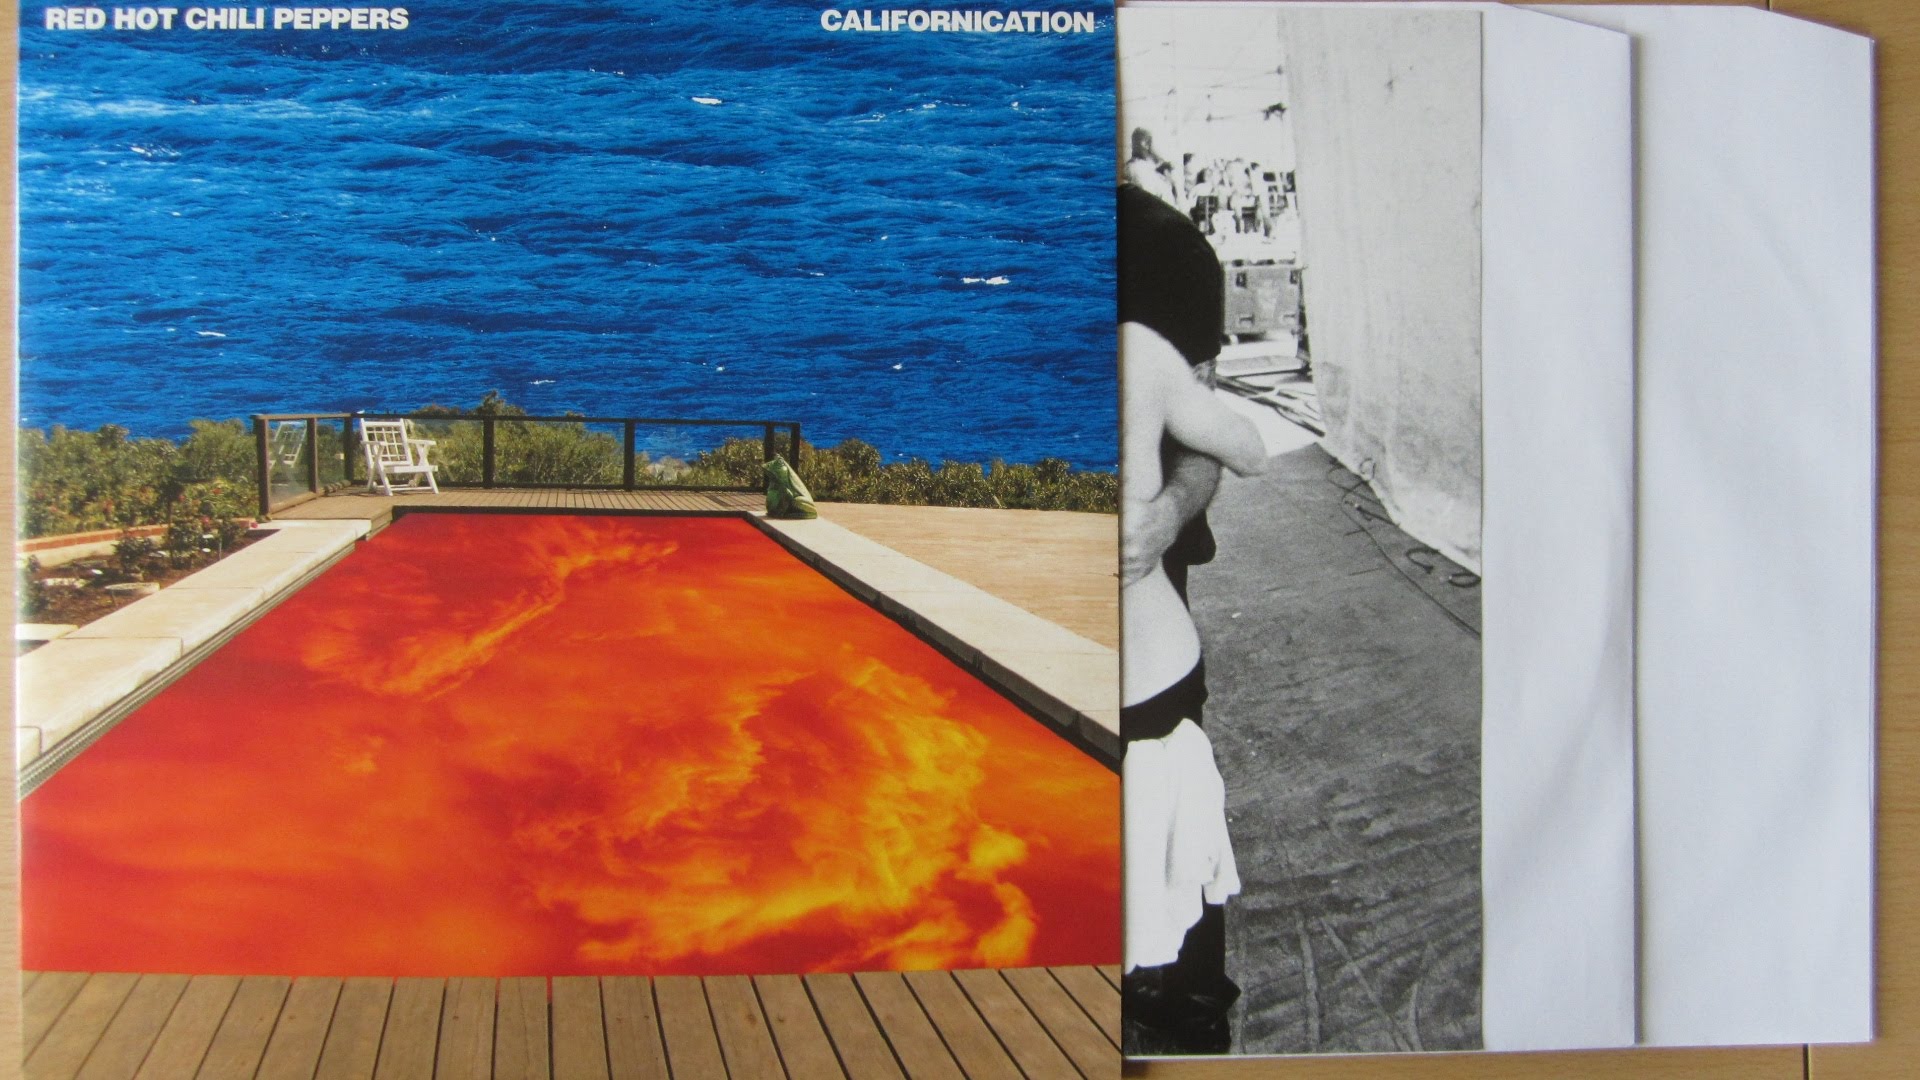 Red Hot Chili Peppers Californication Vinyl Unboxing - Red Hot Chilli Peppers Californication - HD Wallpaper 